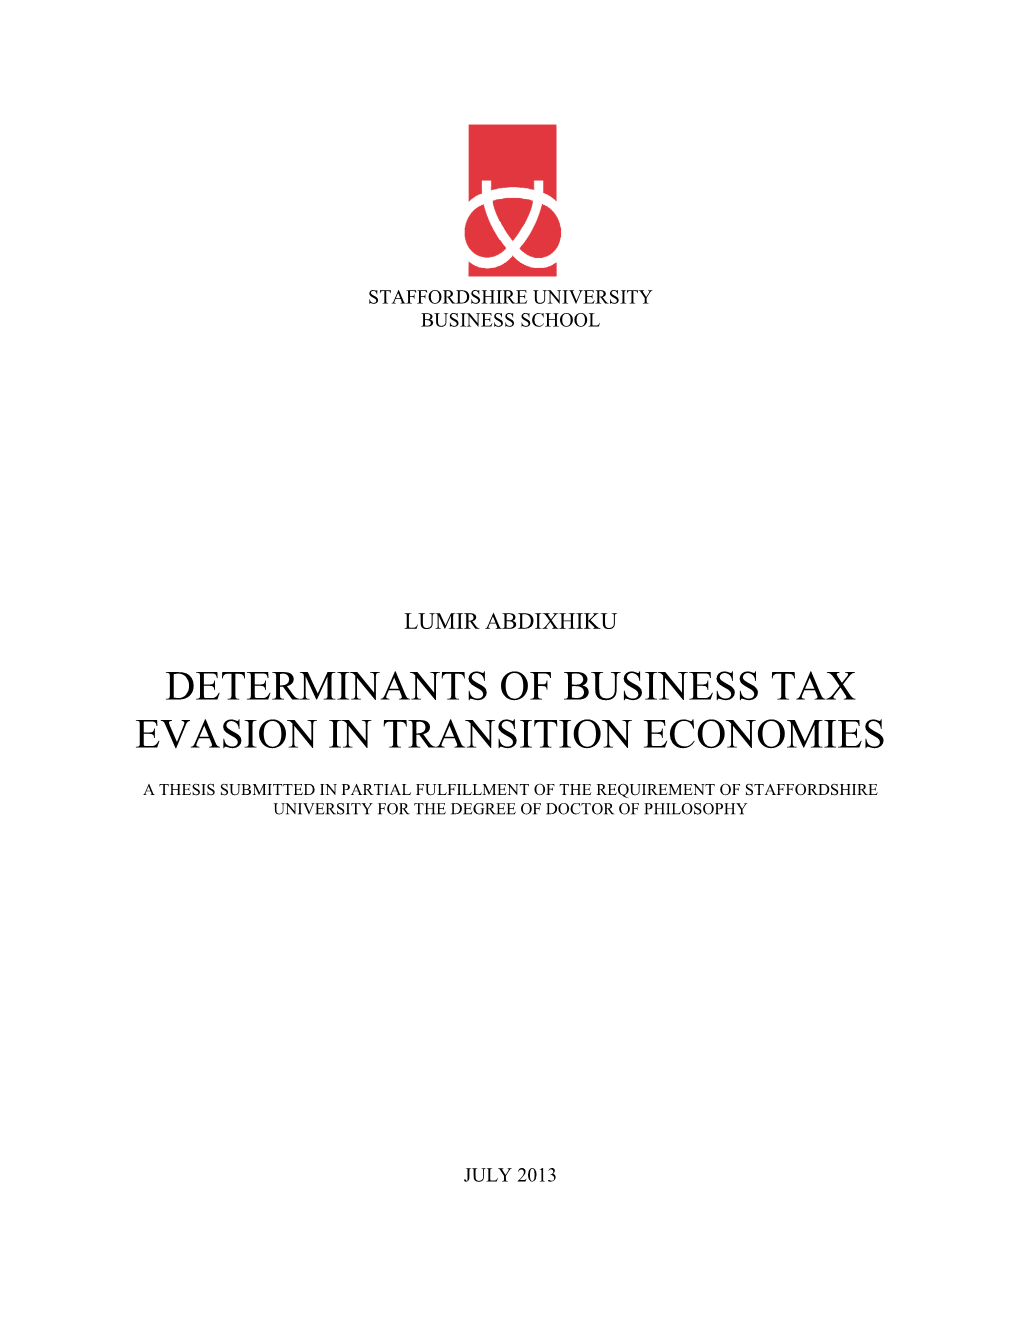 Determinants of Business Tax Evasion in Transition Economies